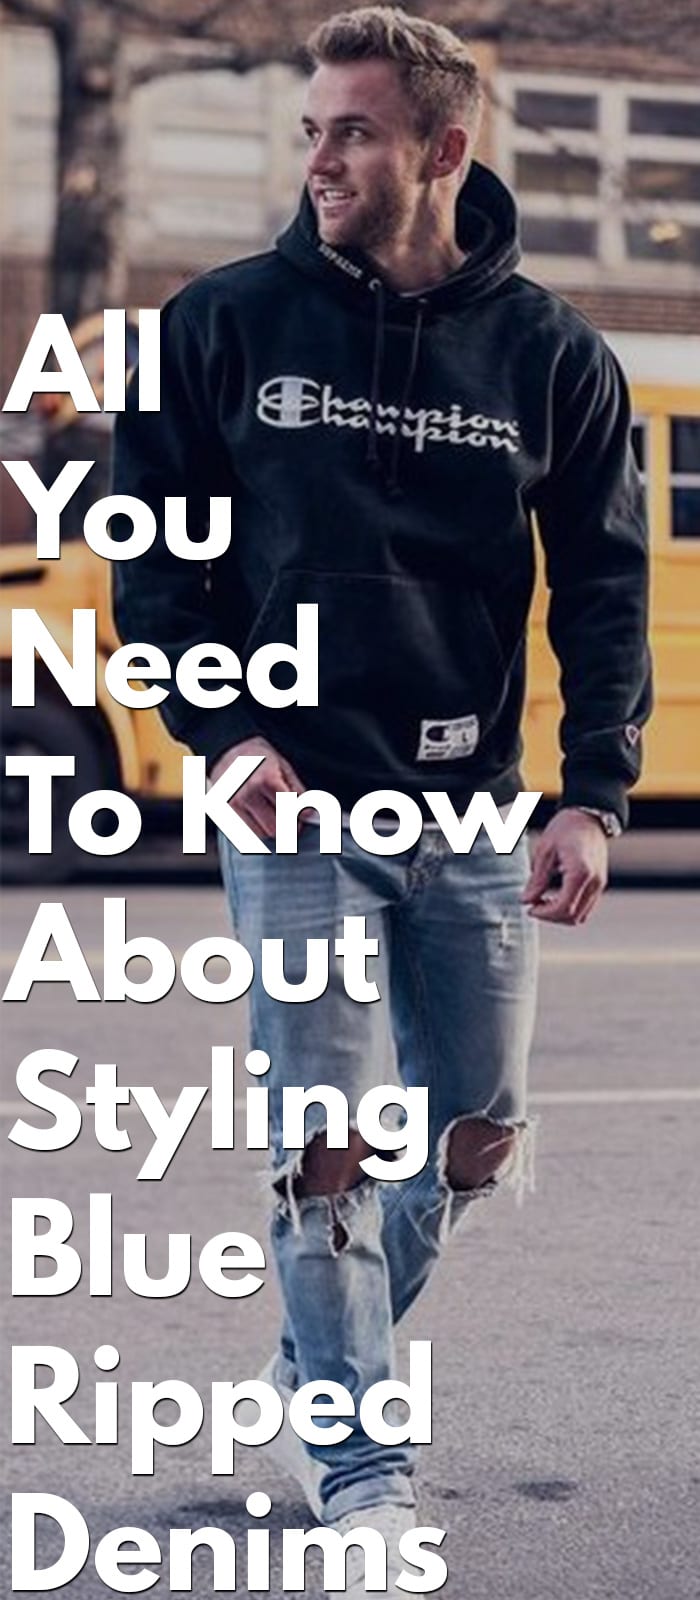 All You Need To Know About Styling Blue Ripped Denims